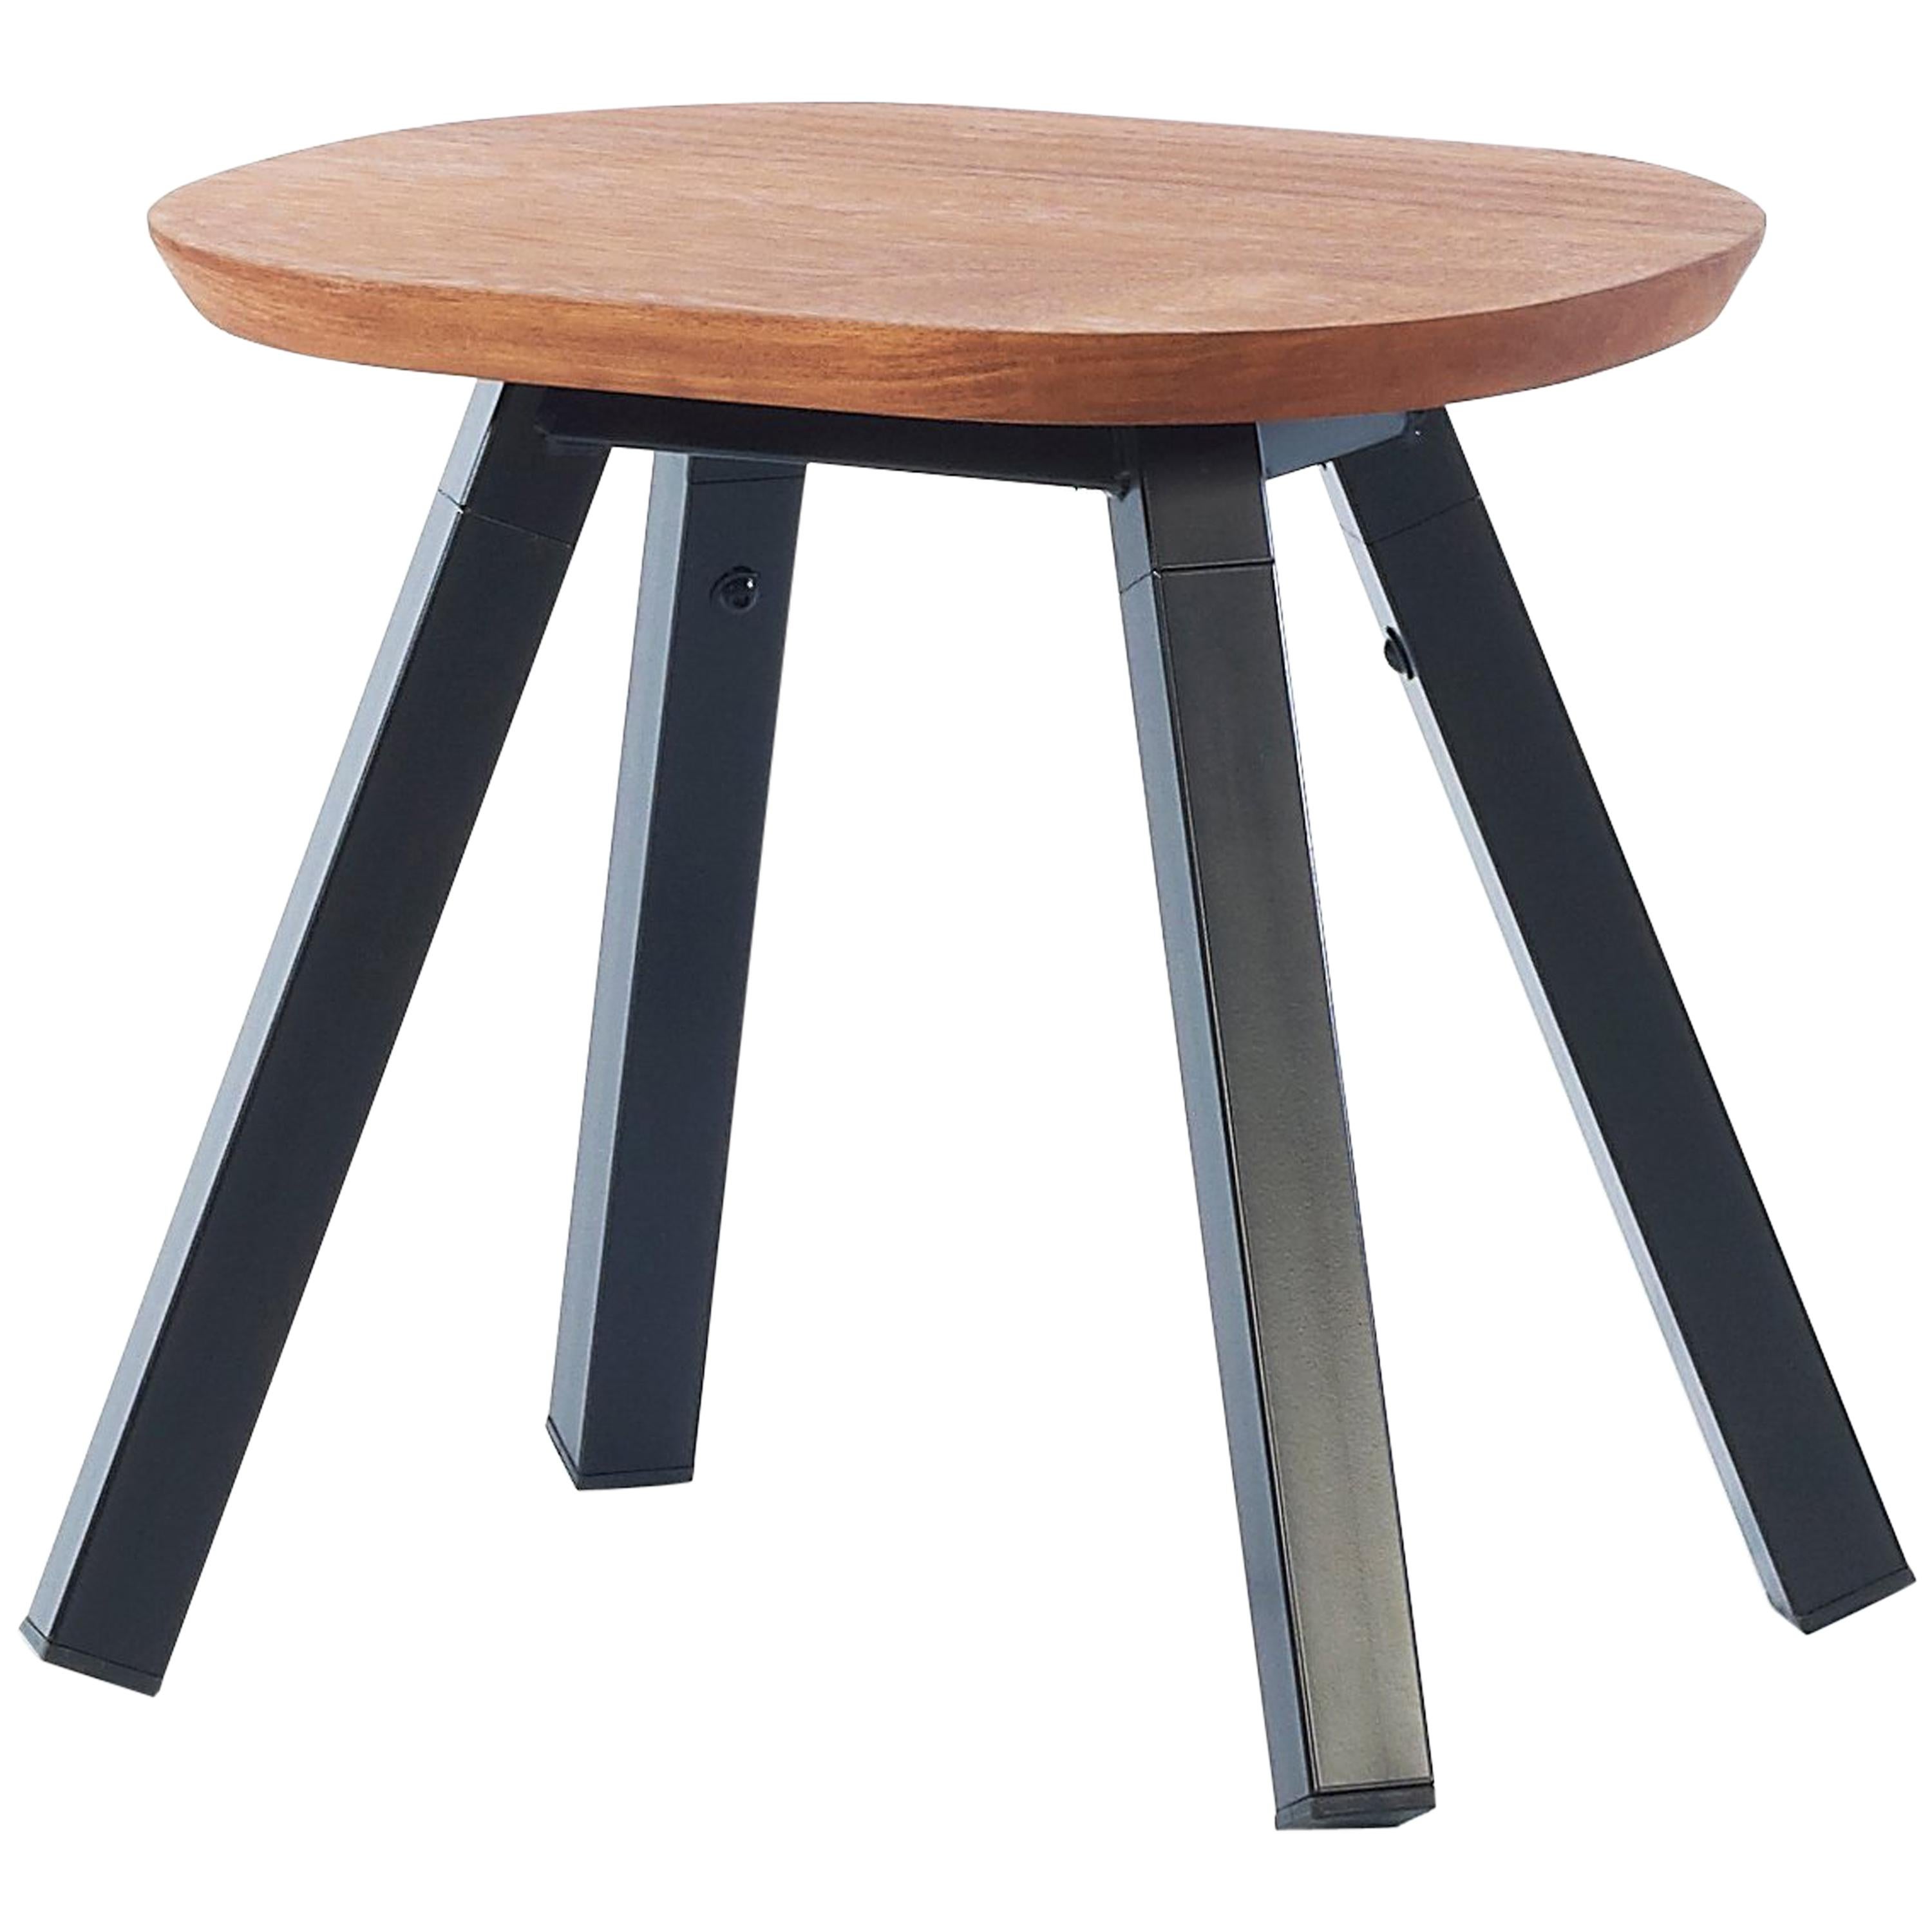 RS Barcelona You and Me Stool in Iroko and Black by A.P.O. For Sale